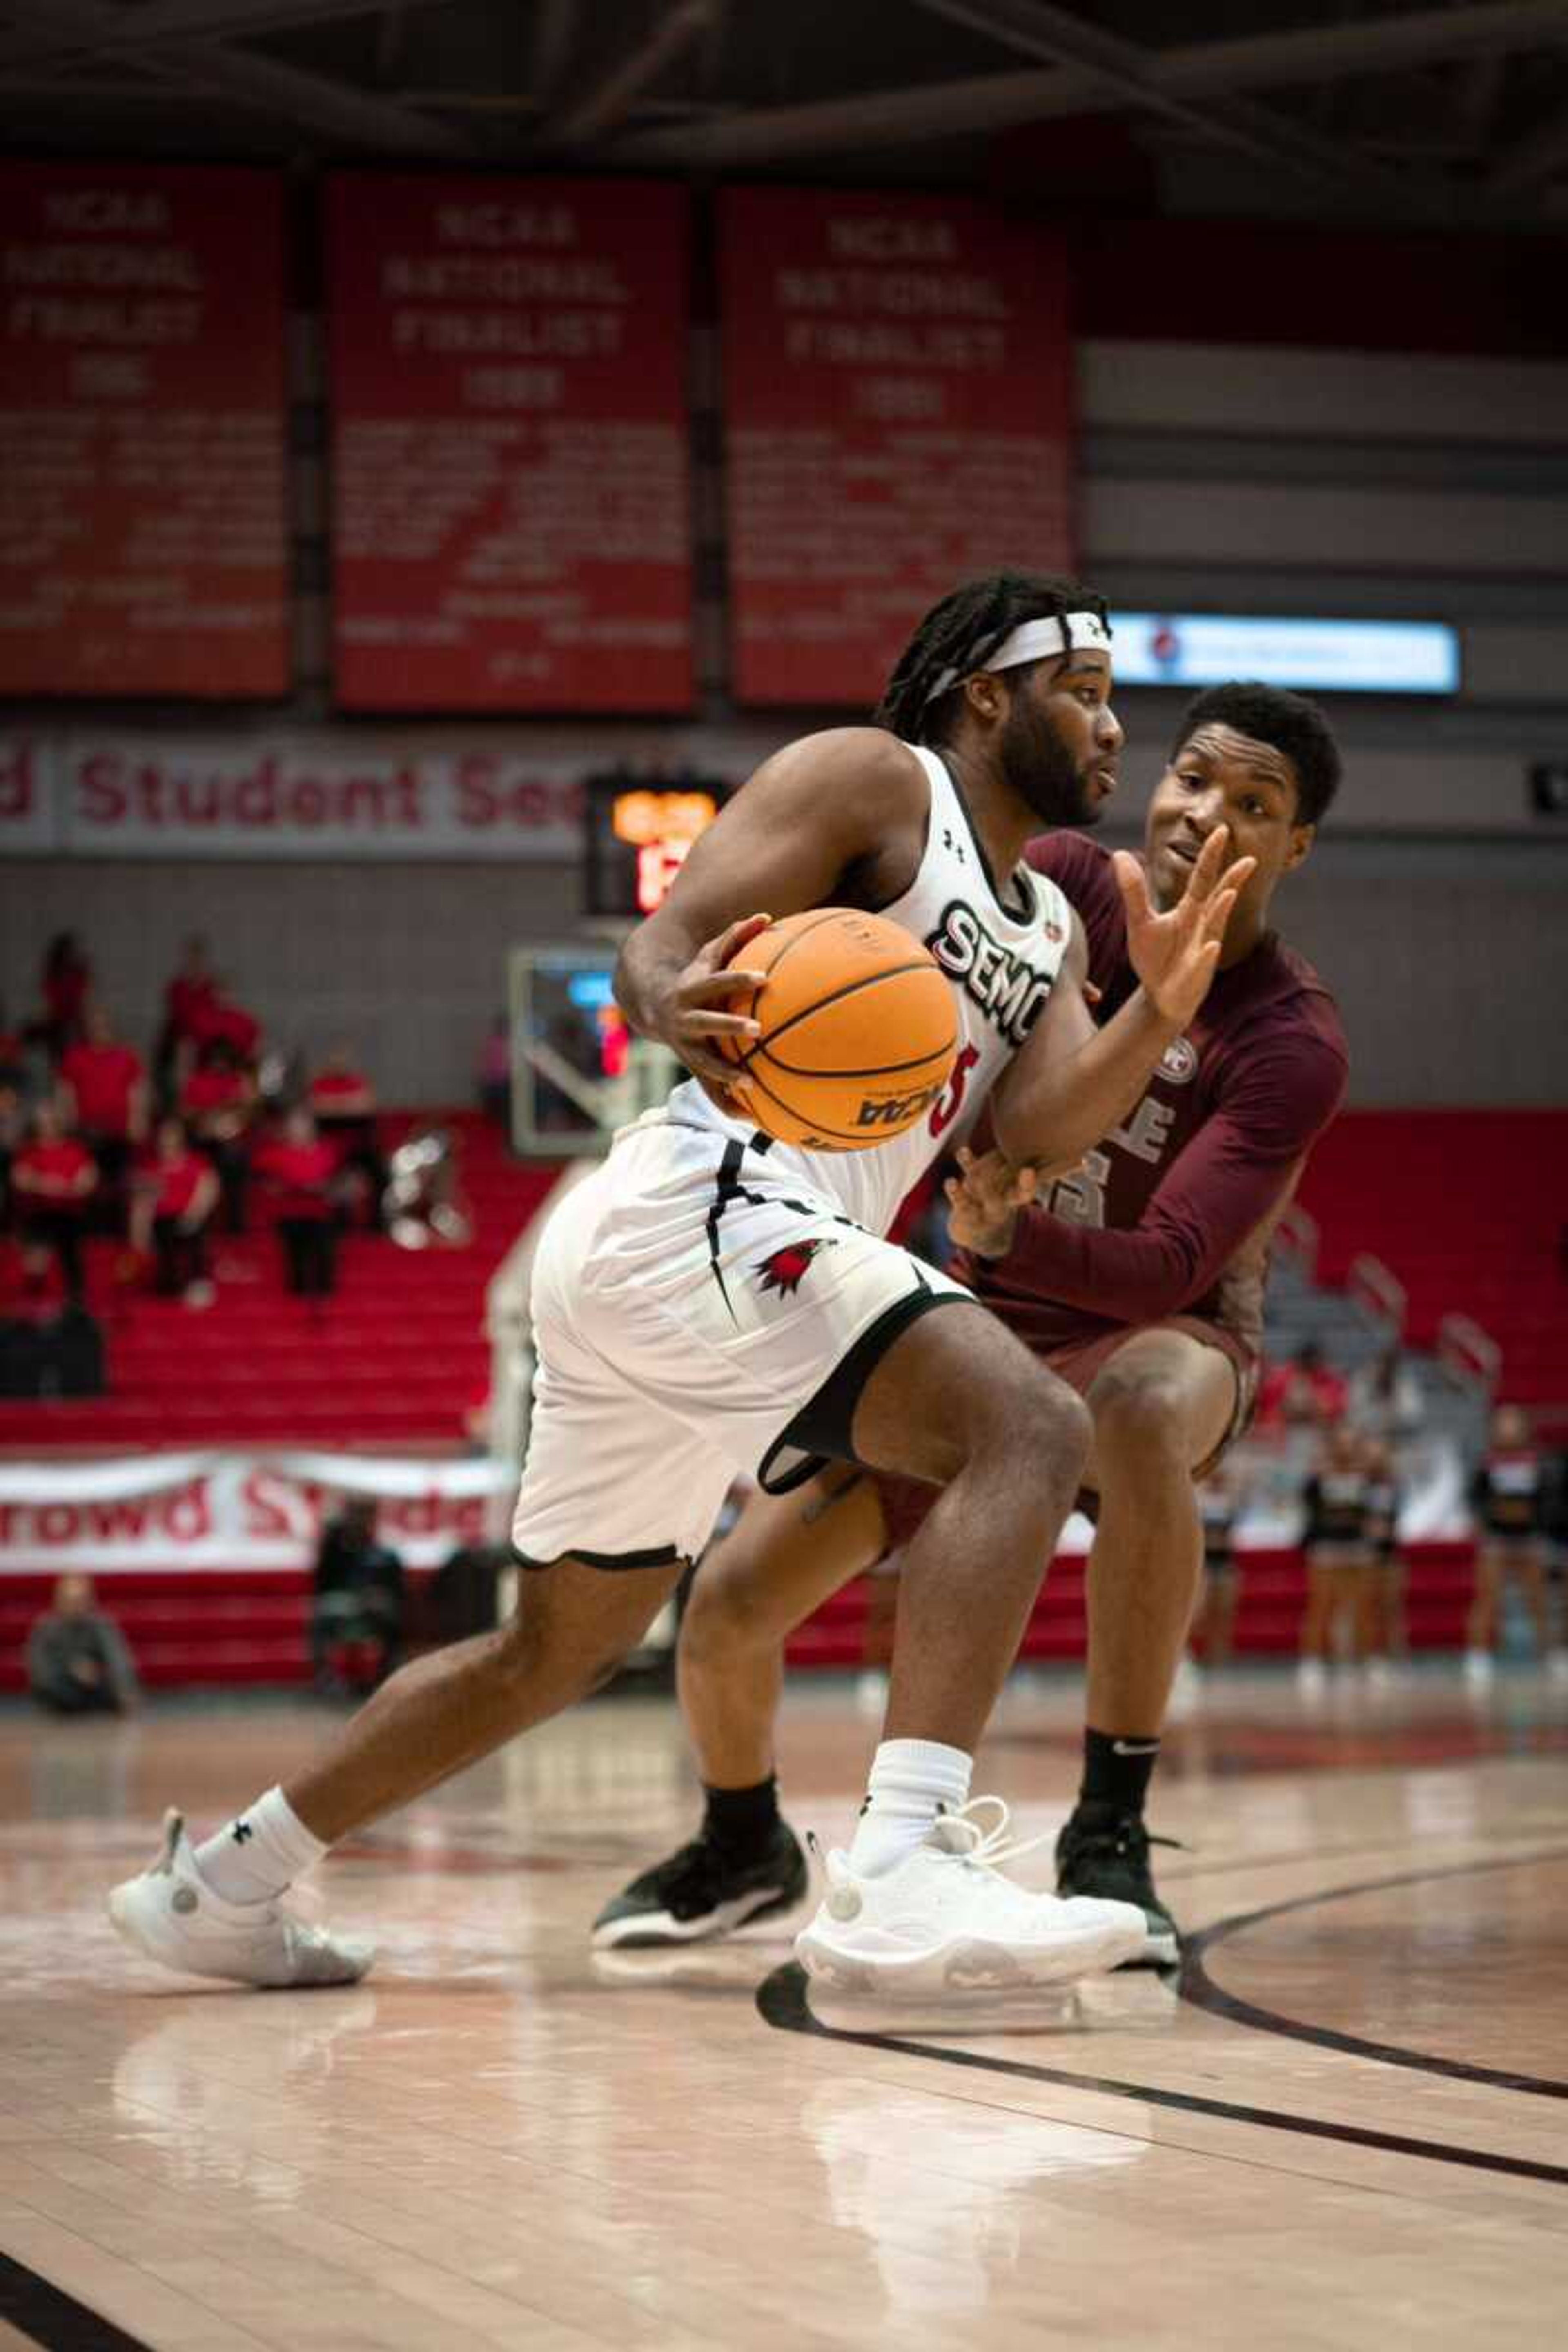 Senior guard Chris Harris (05) attempts to move past an Arkansas-Little Rock player. Harris has been a starting player in 21 games this season for the men's basketball team.